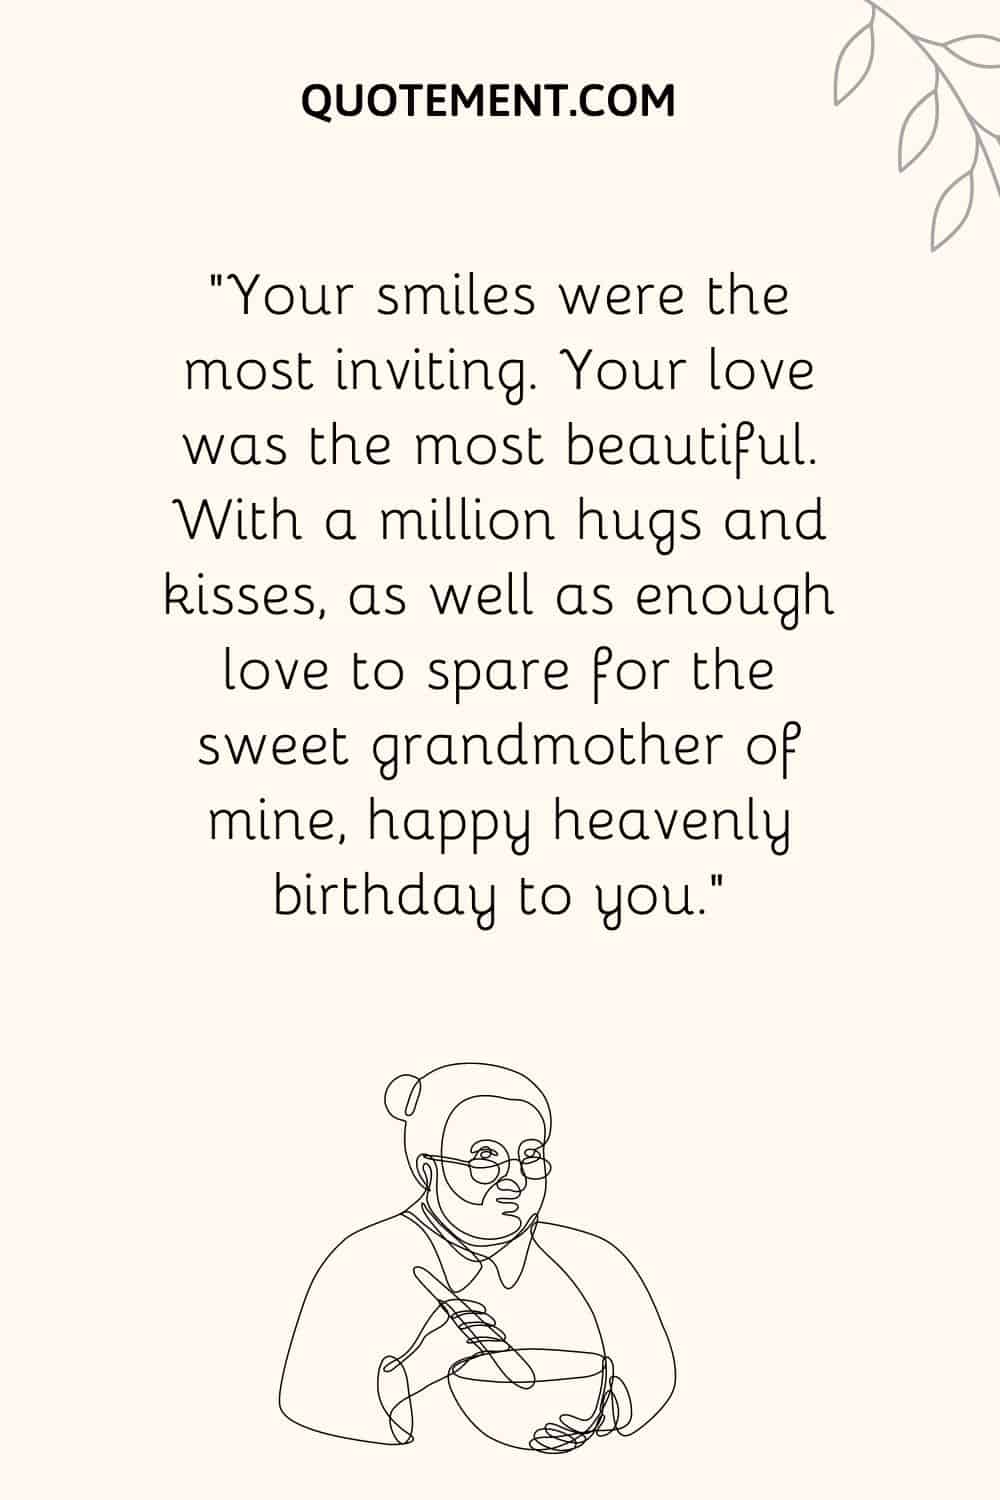 “Your smiles were the most inviting. Your love was the most beautiful. With a million hugs and kisses, as well as enough love to spare for the sweet grandmother of mine,